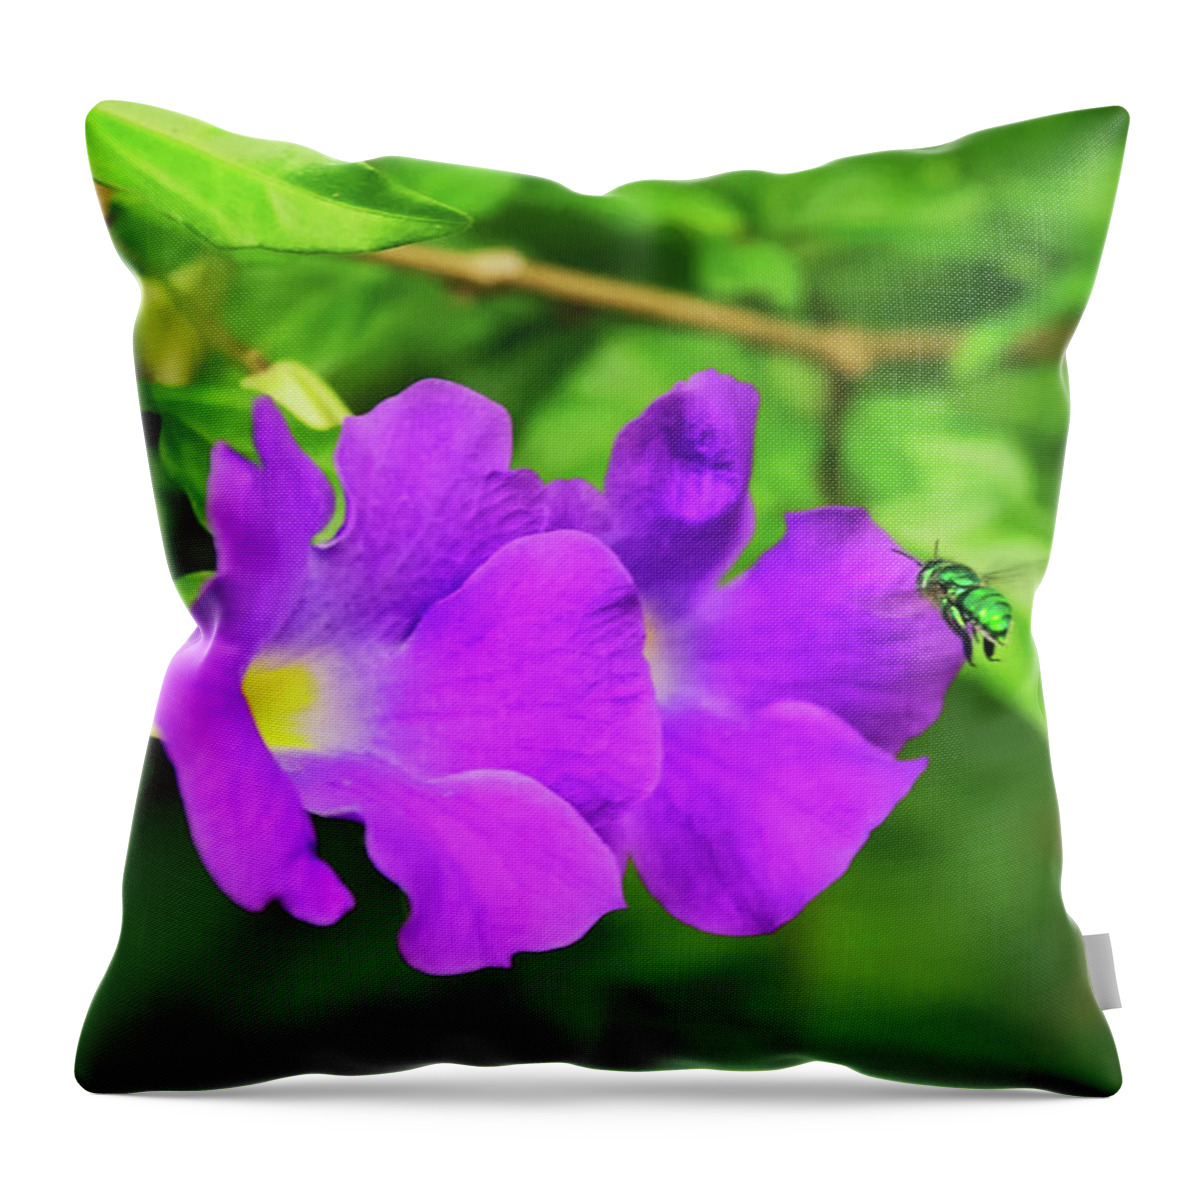 Cuckoo Wasp Throw Pillow featuring the photograph Cuckoo Wasp Darting into Purple Flower by Artful Imagery